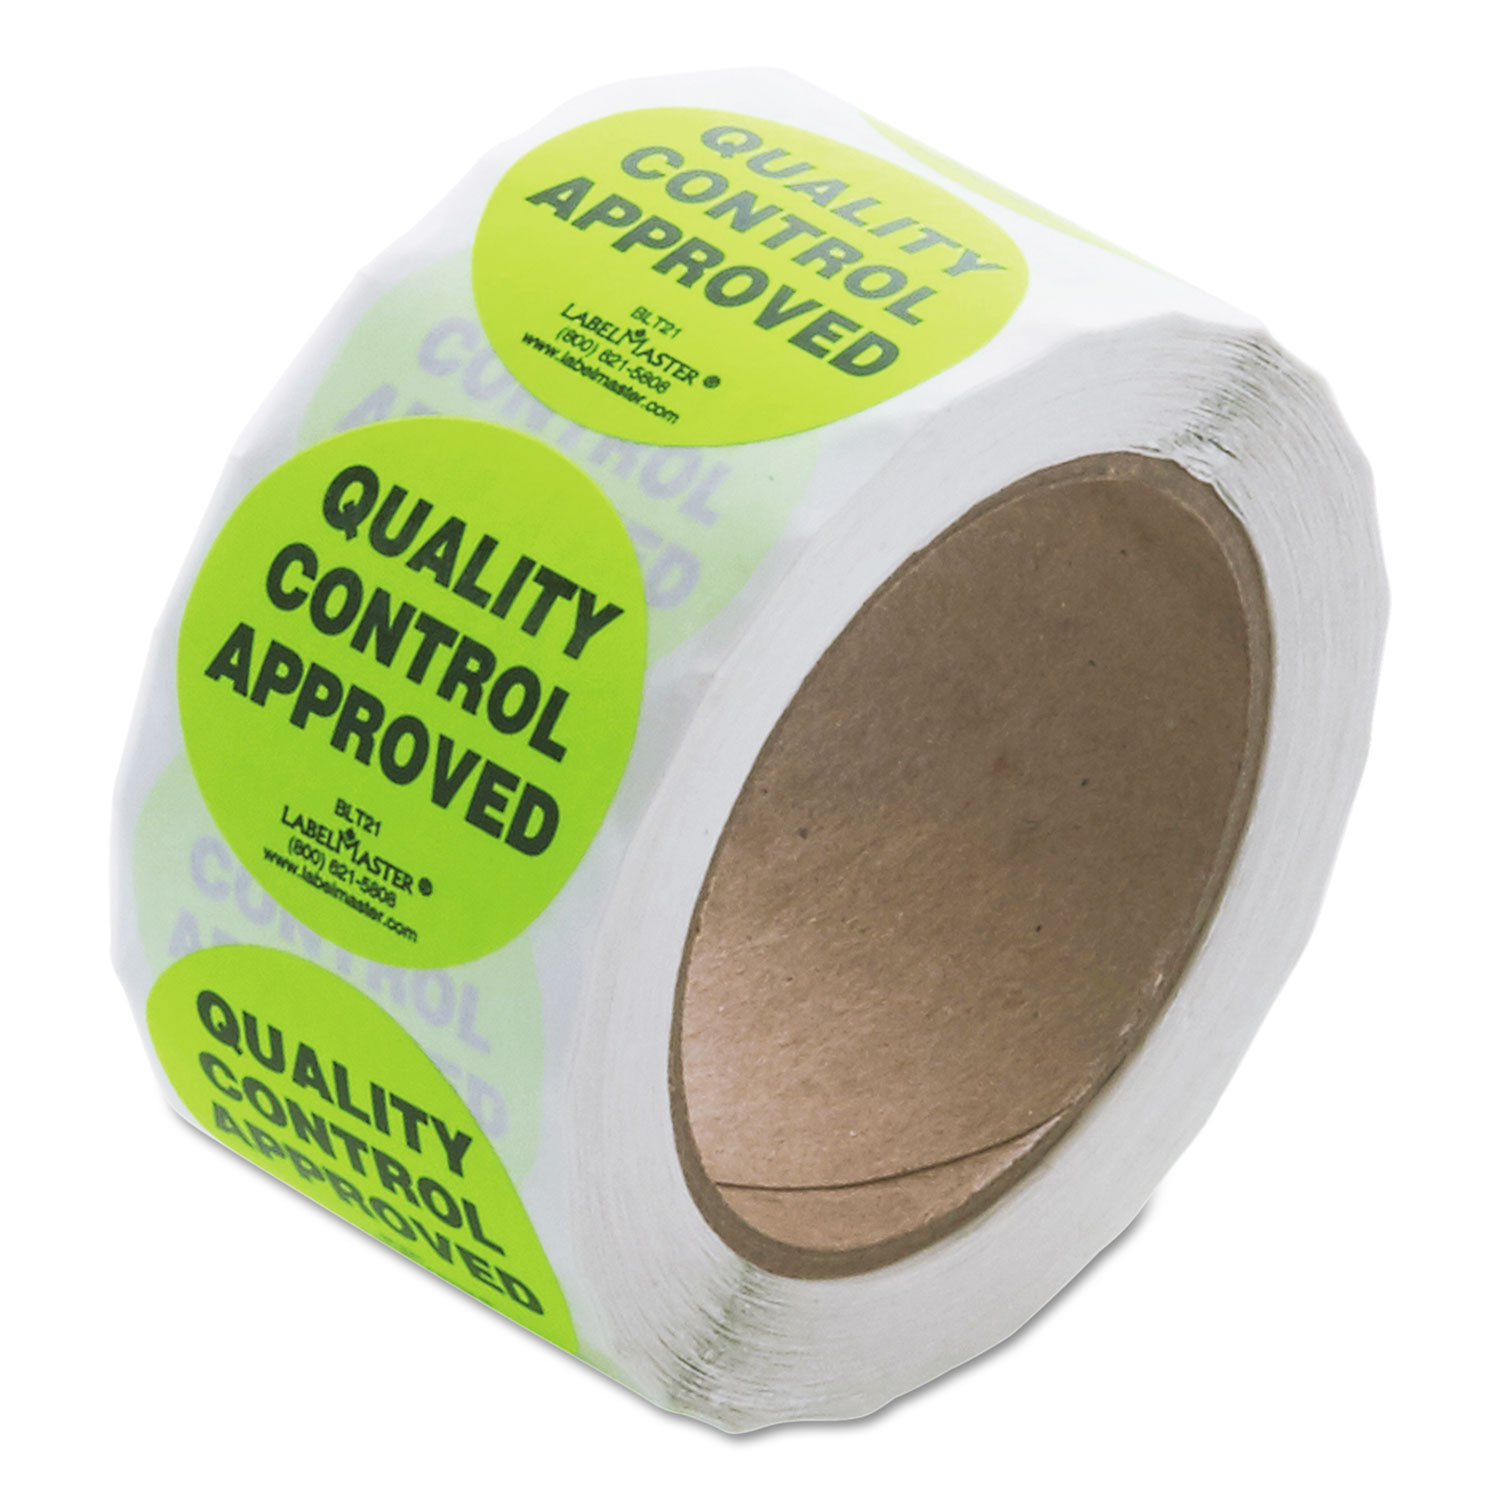 Warehouse Self-Adhesive Label, 2 dia., QUALITY CONTROL APPROVED, 500/Roll